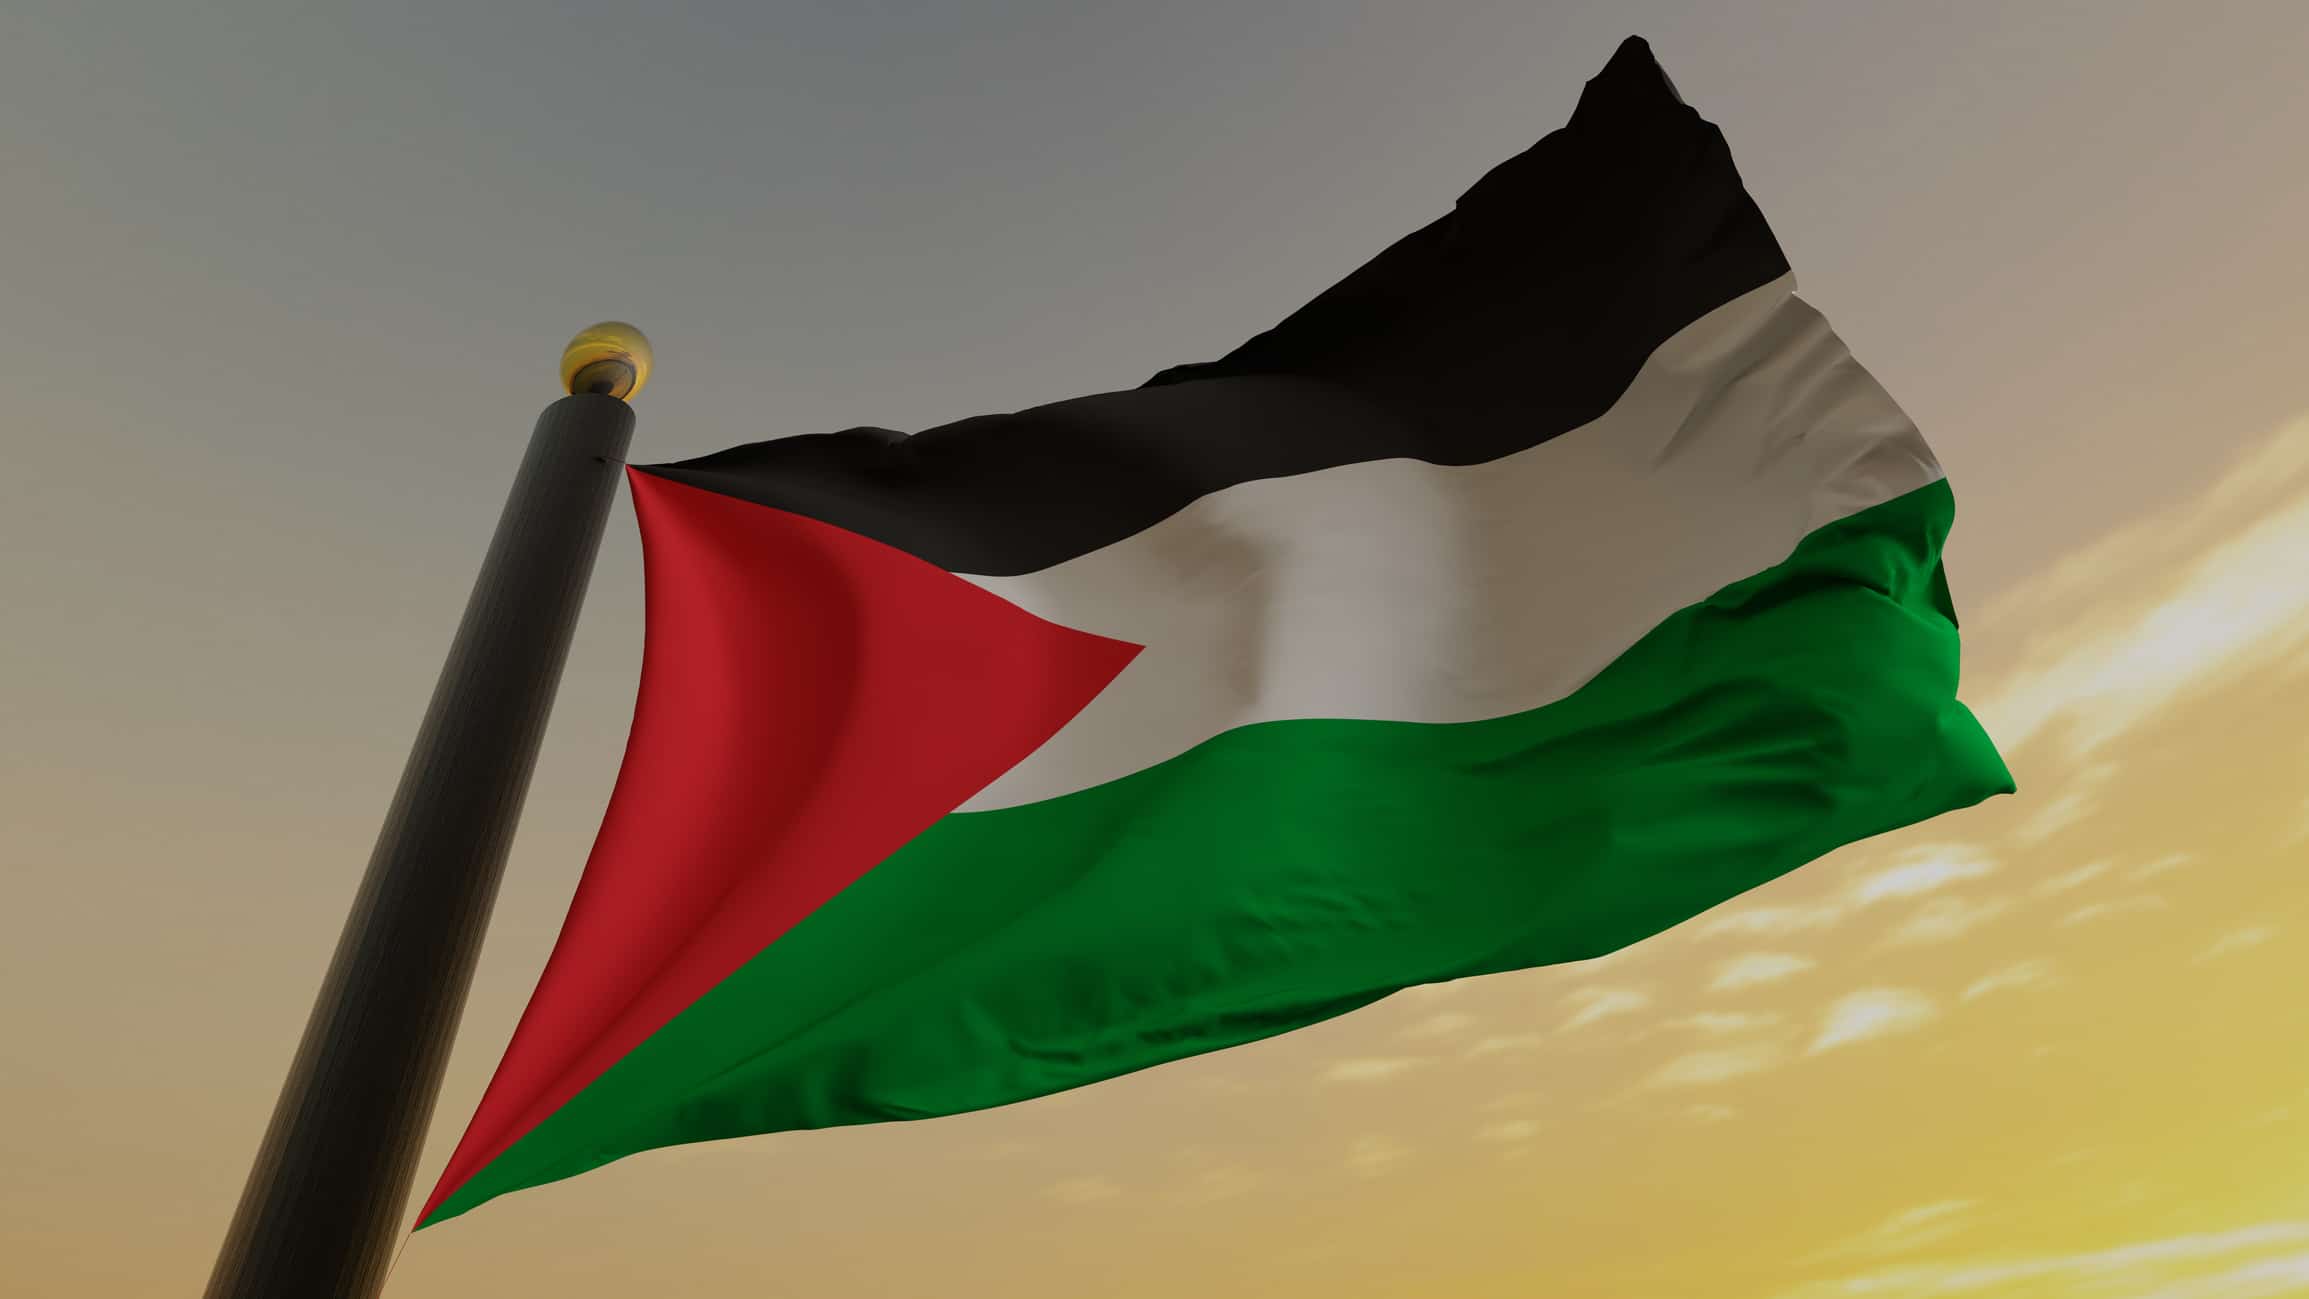 kultur-norge israel gaza palestina Concept of Conflict between Israel and Palestine 730.no